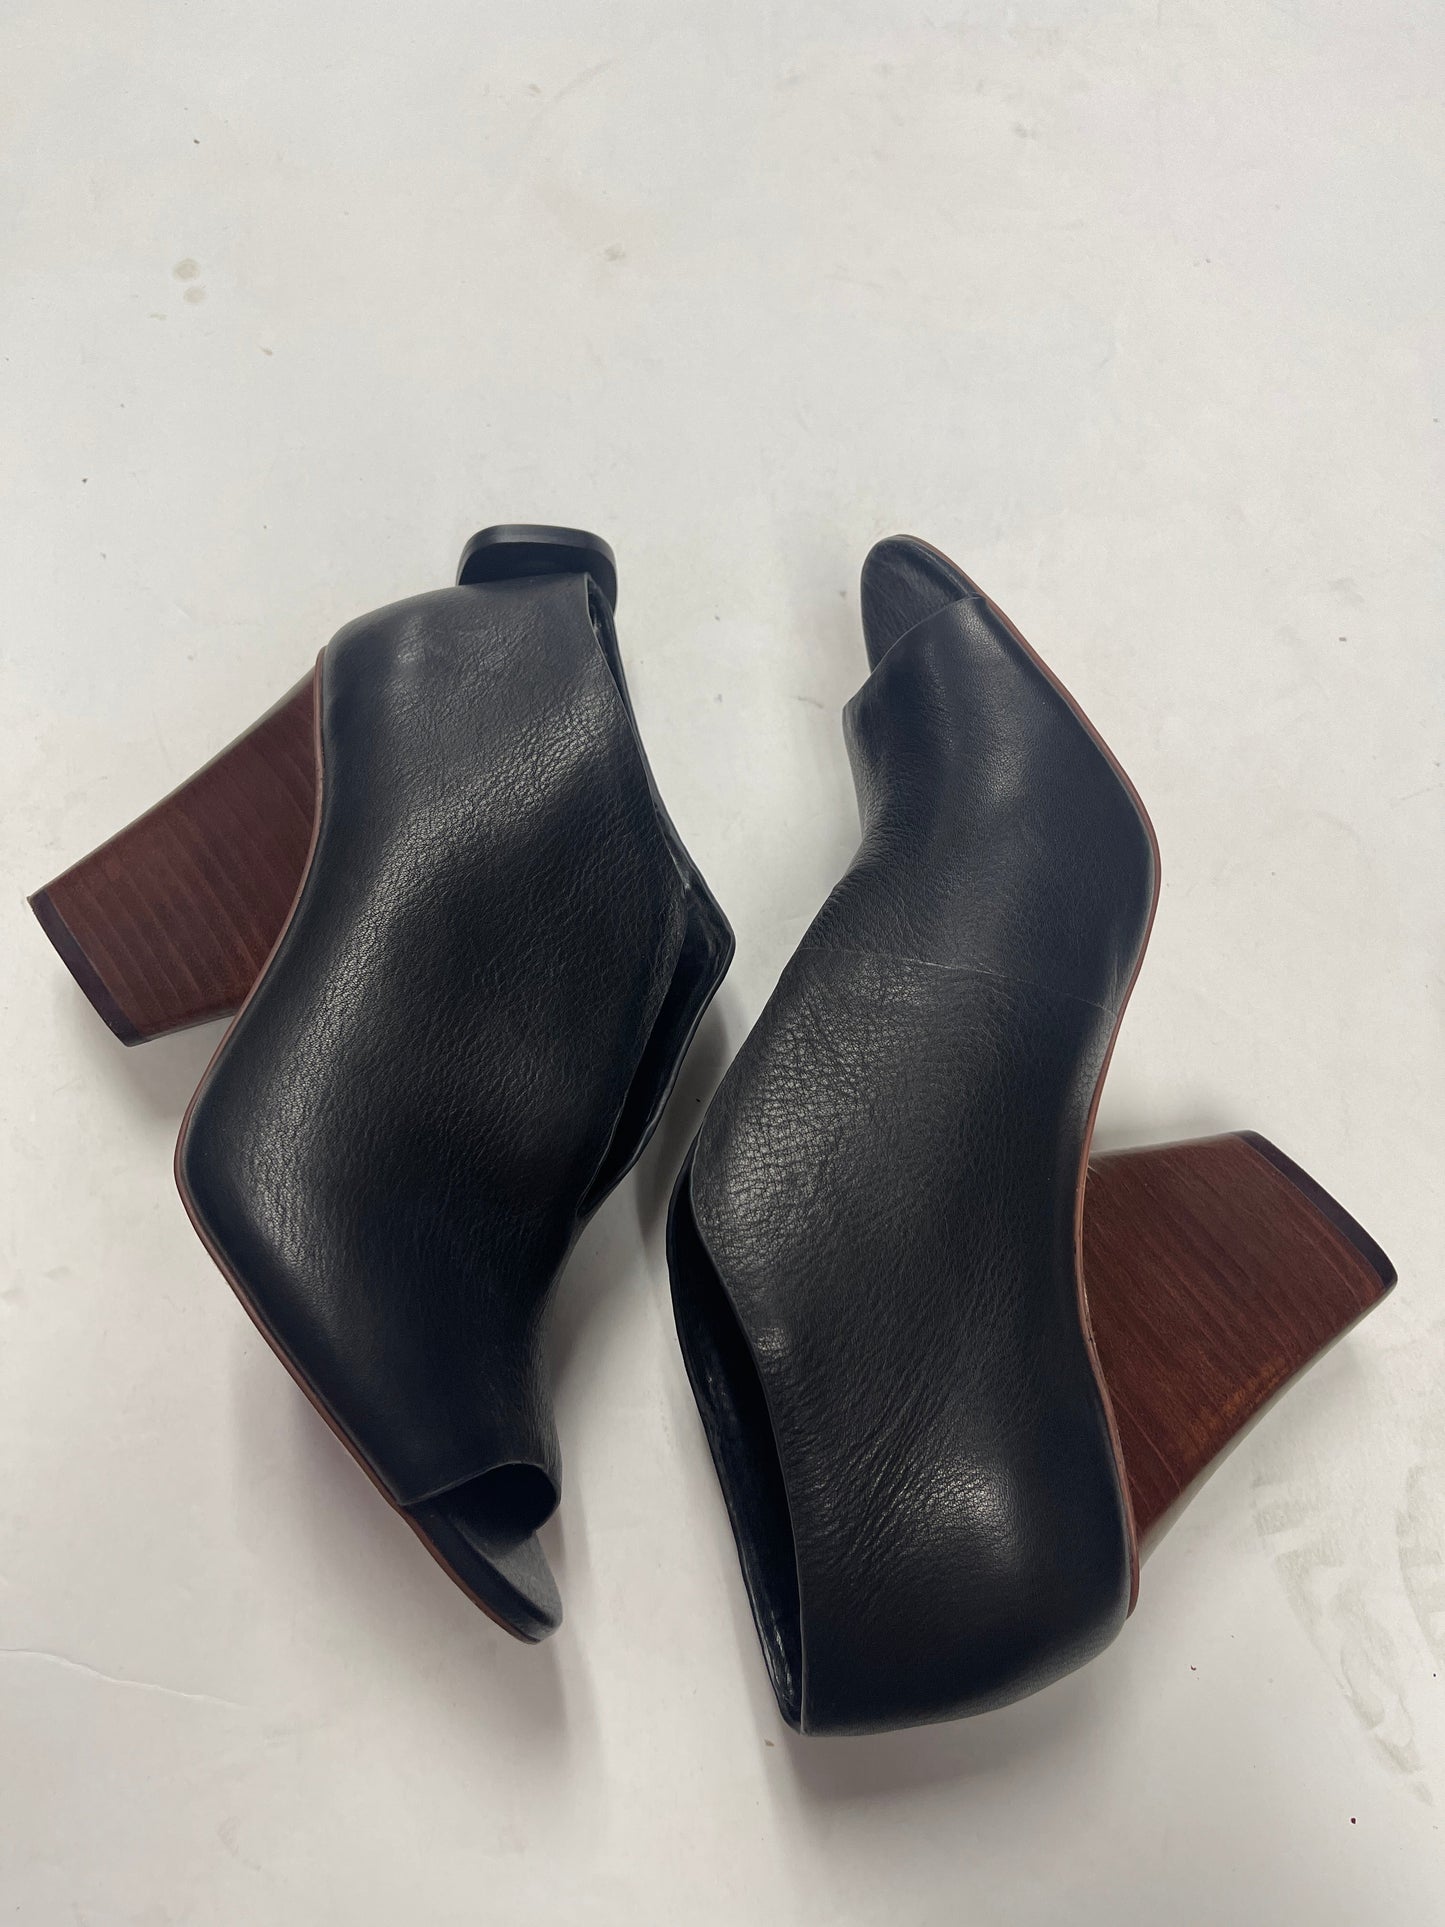 Black Boots Ankle Heels Vince Camuto, Size 7.5